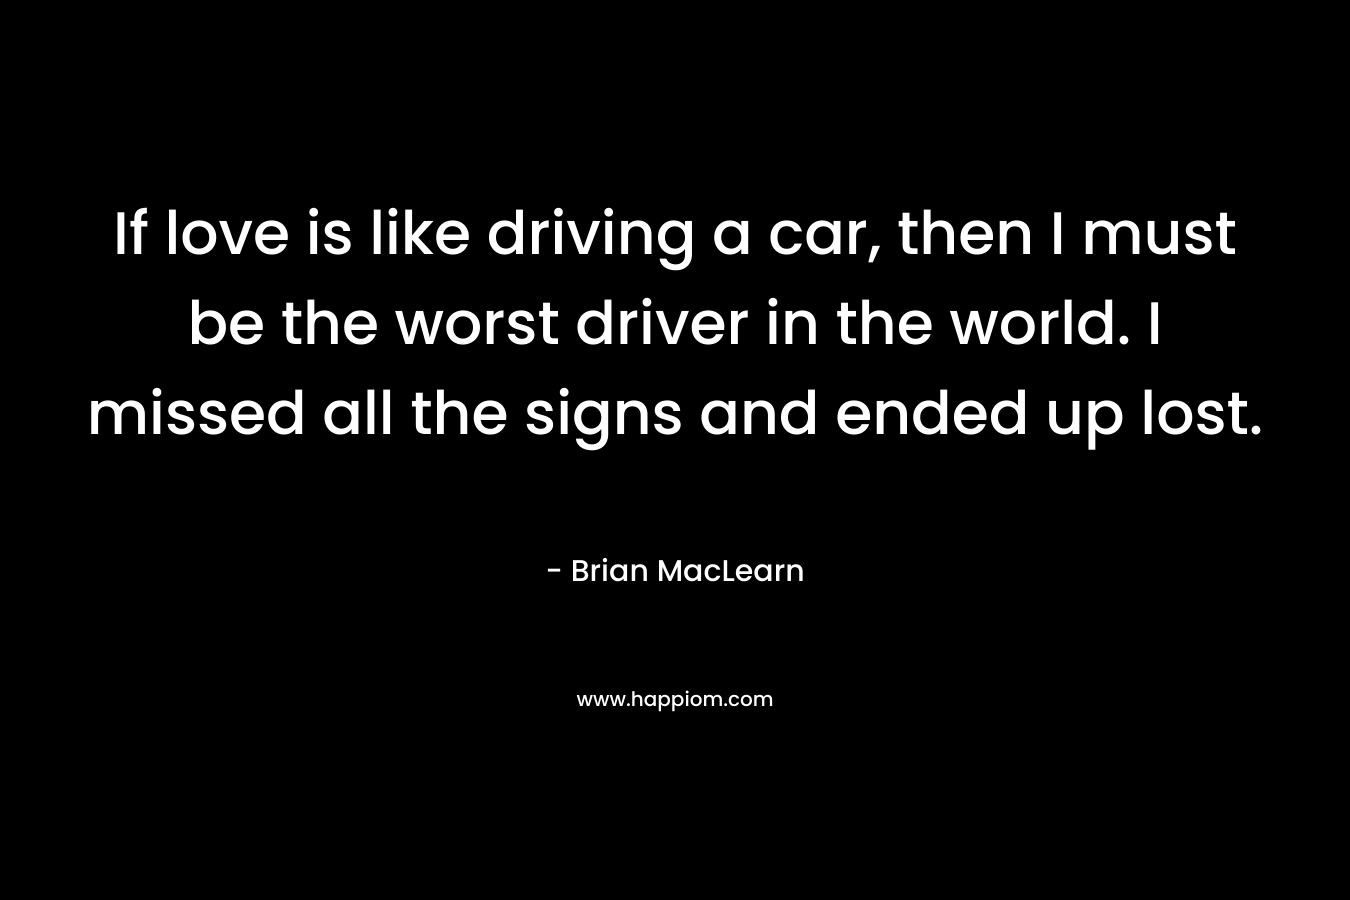 If love is like driving a car, then I must be the worst driver in the world. I missed all the signs and ended up lost. – Brian MacLearn